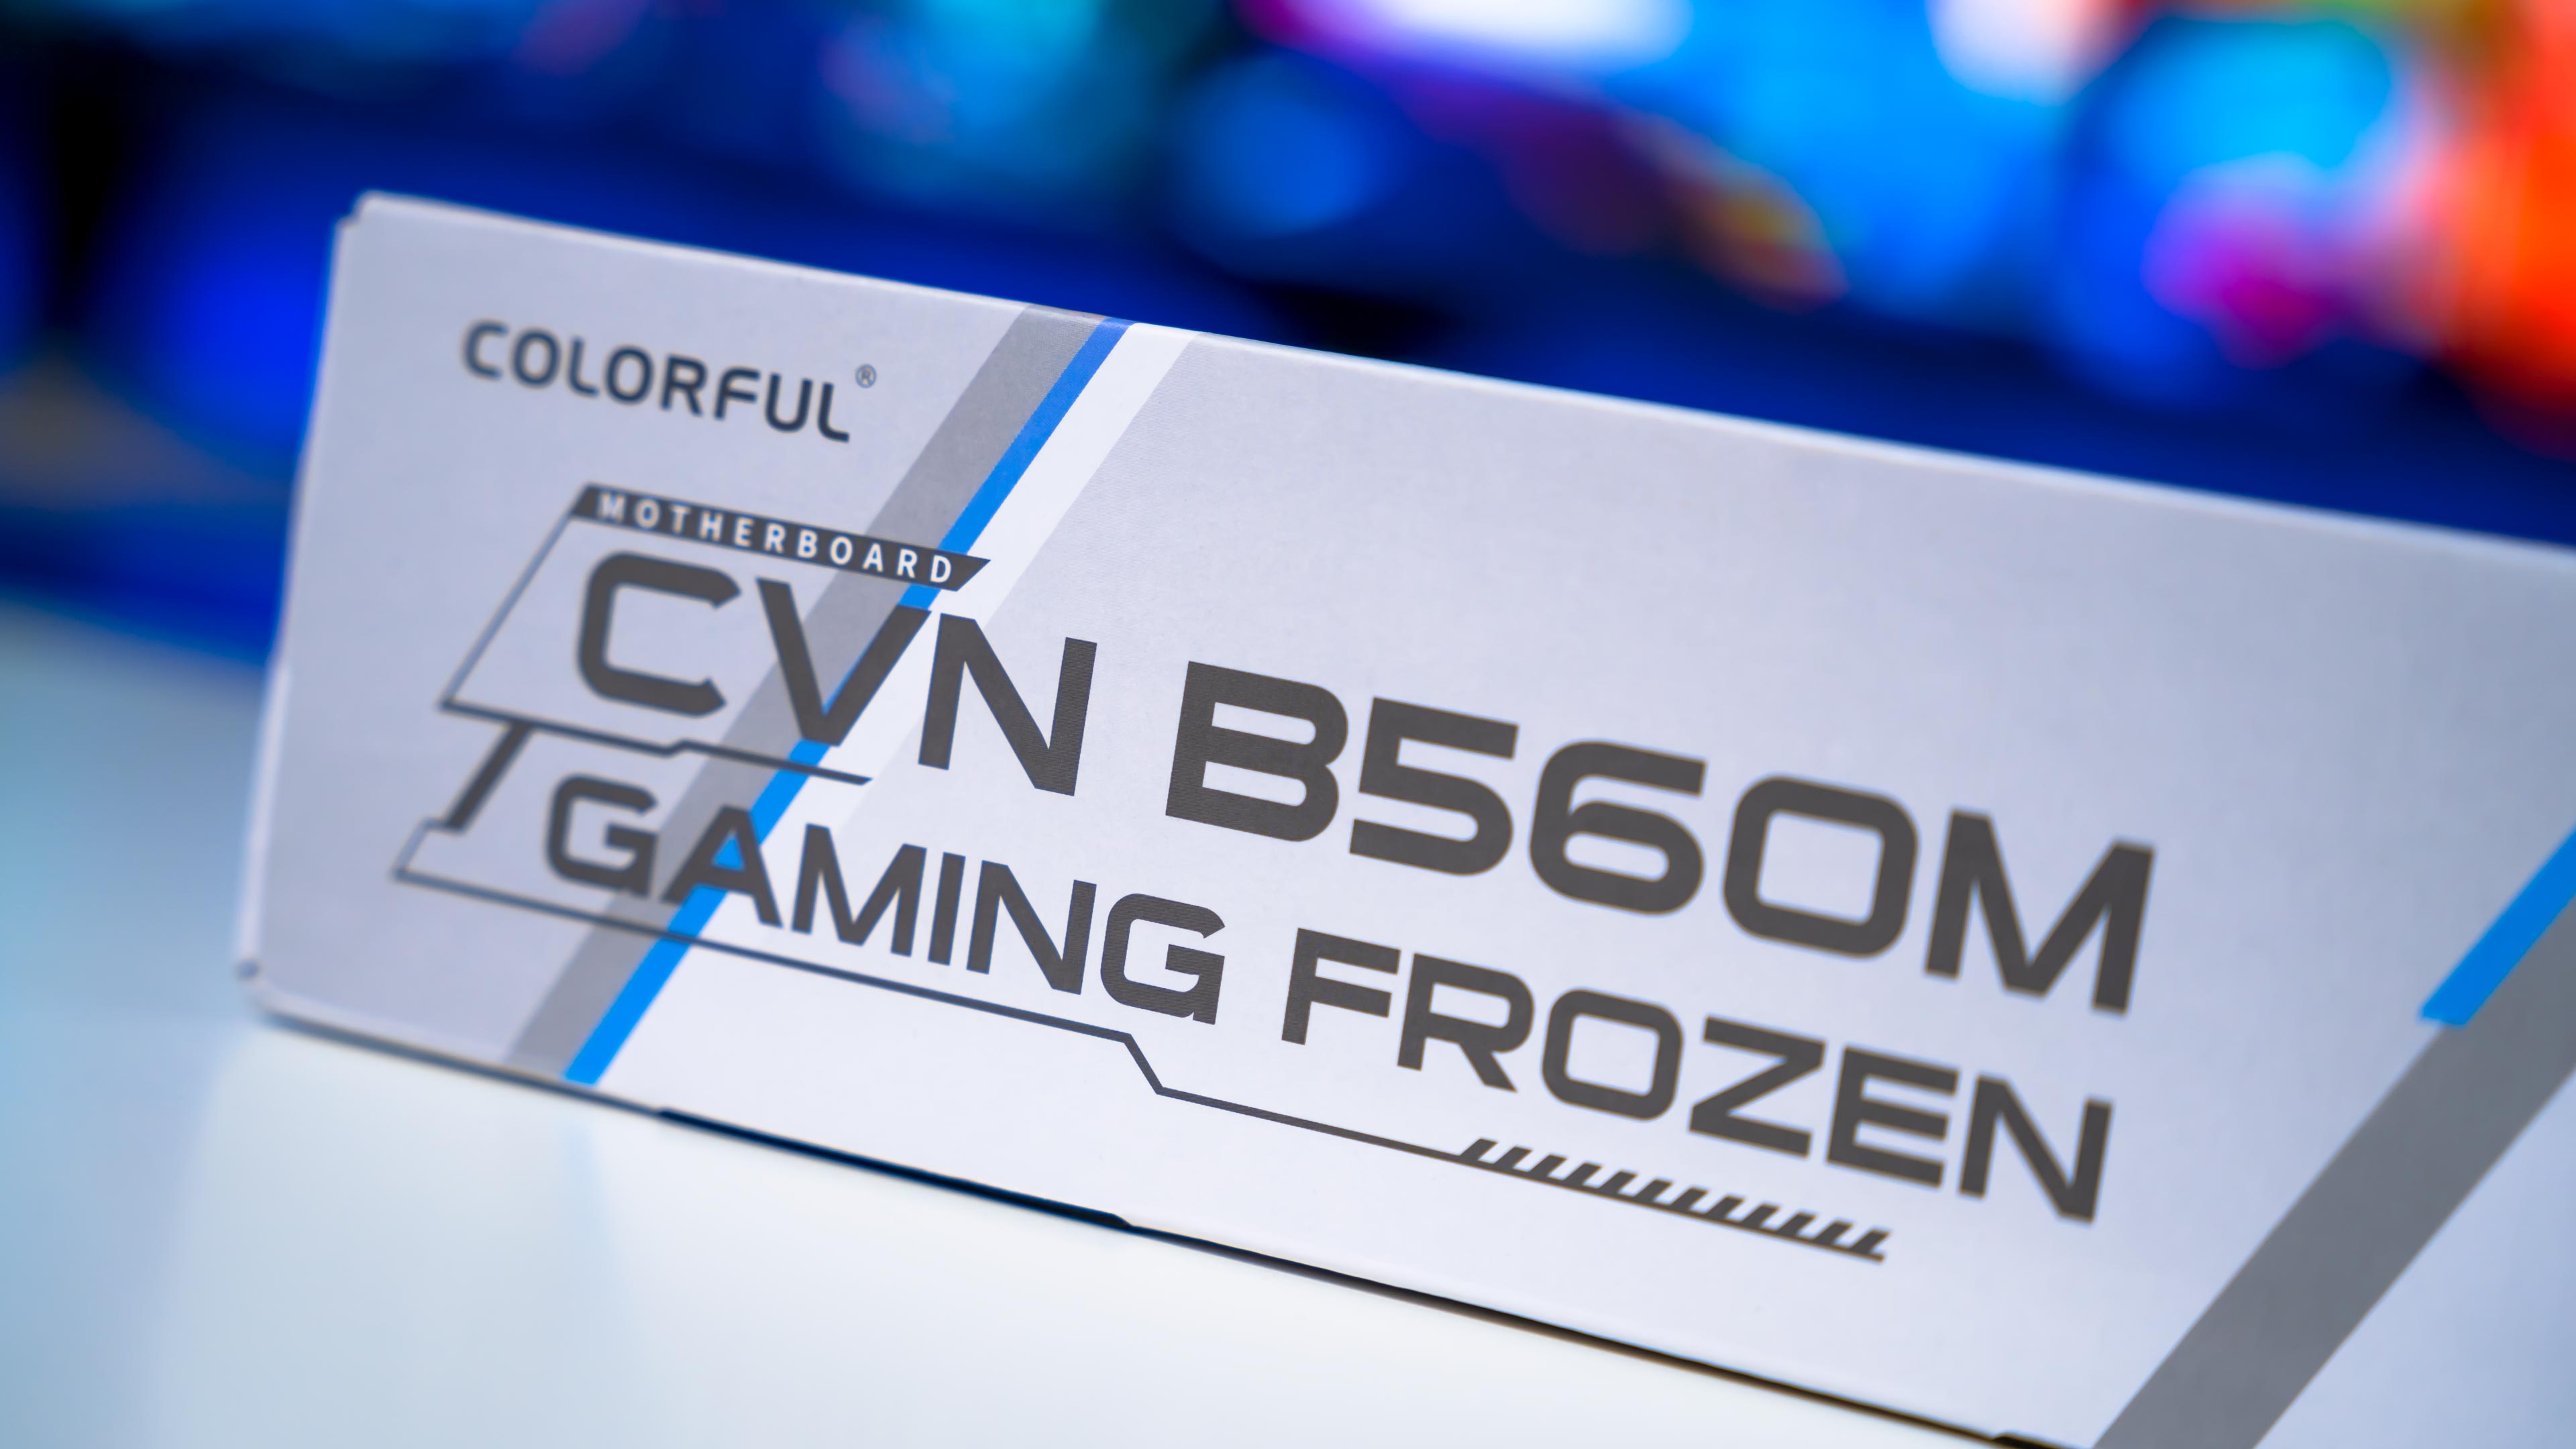 Colorful B560M CVN Gaming Frozen Box (3)